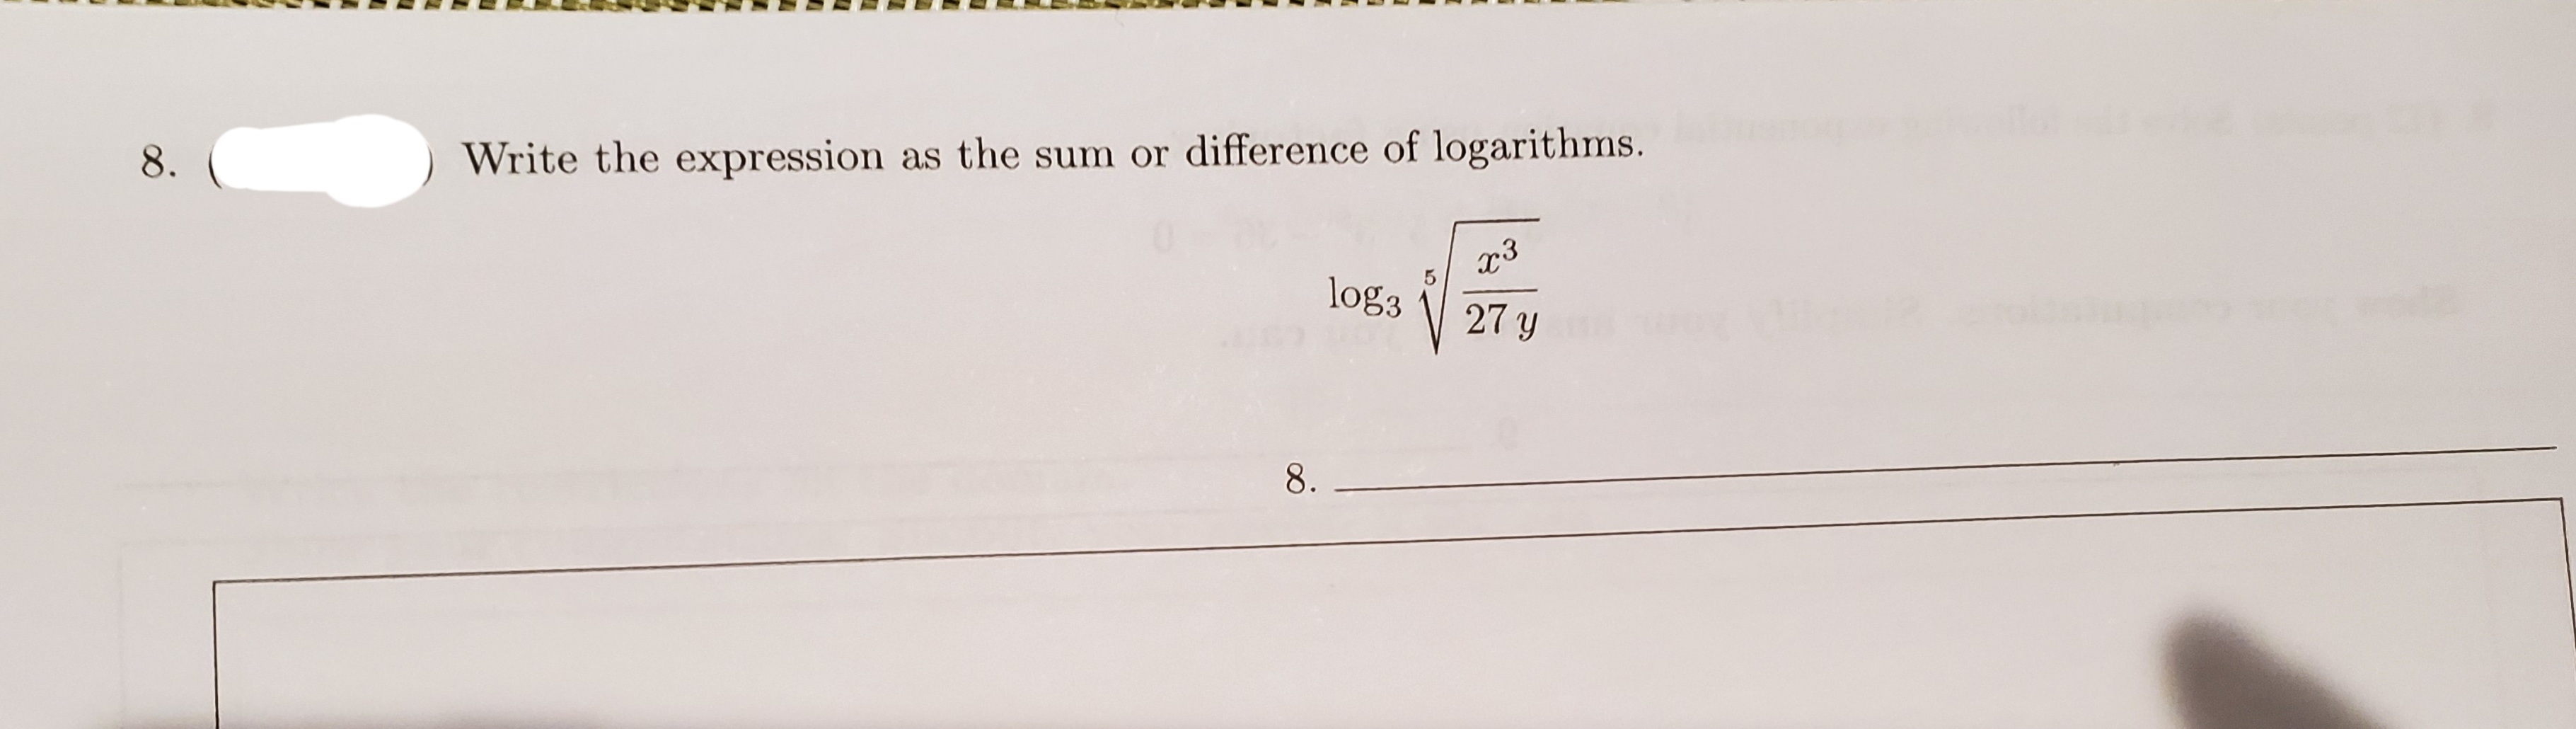 8.
Write the expression as the sum or difference of logarithms.
x3
log3
27 y
8.
